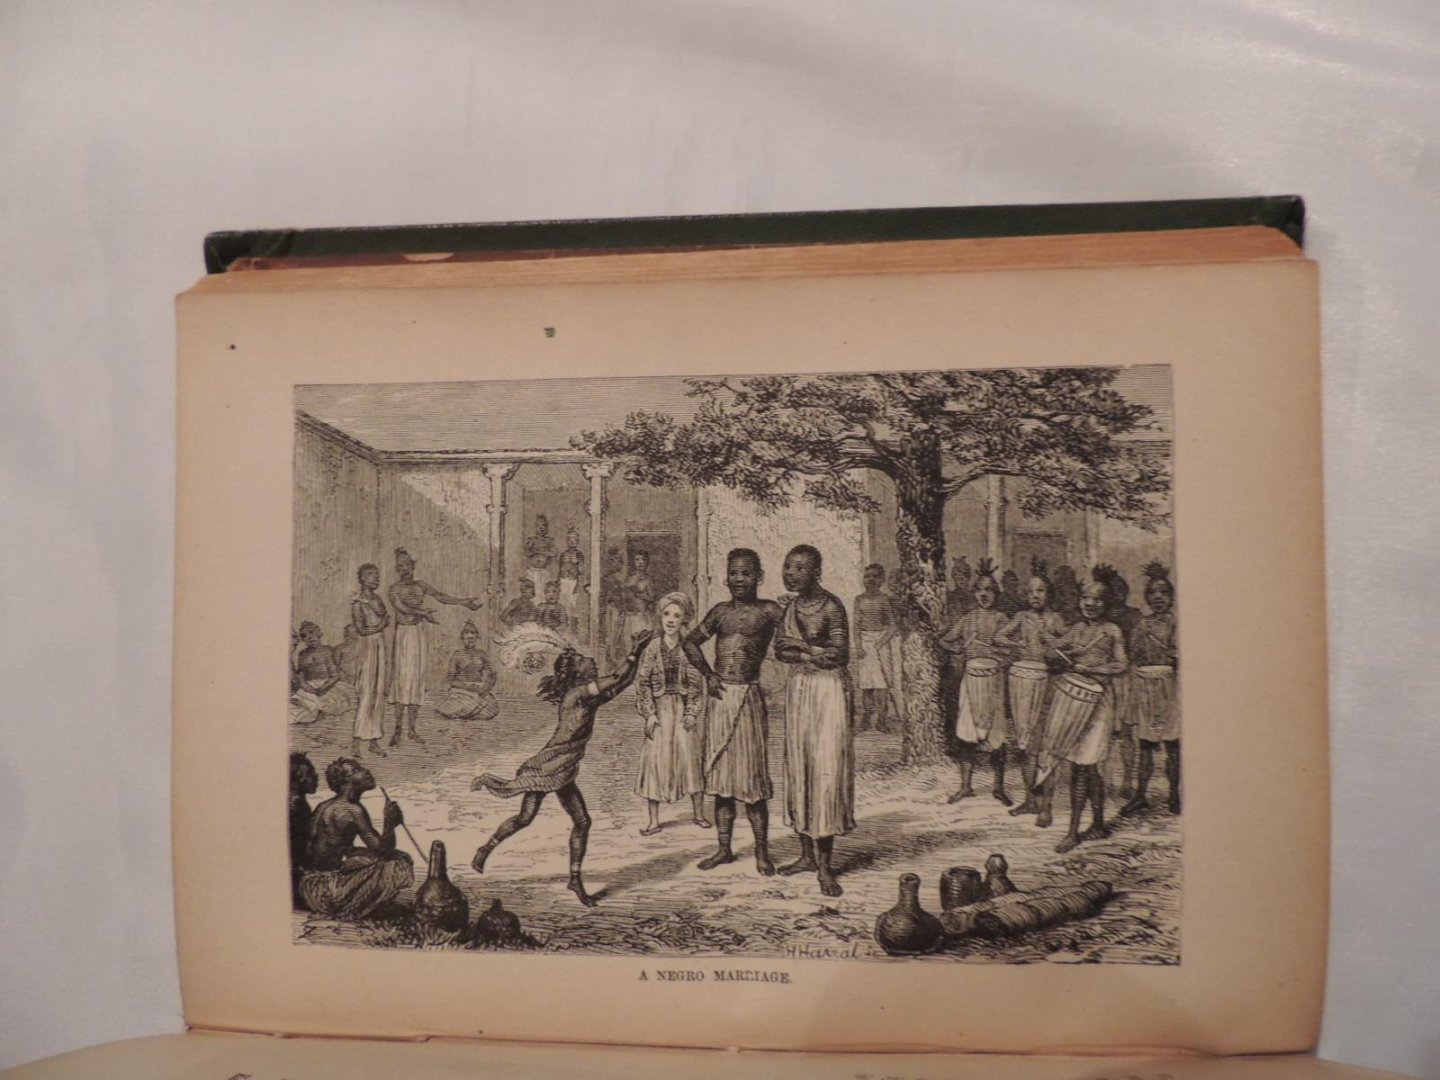 Henry M. Stanley - My Kalulu - Prince, King, and Slave: A Story of Central Africa